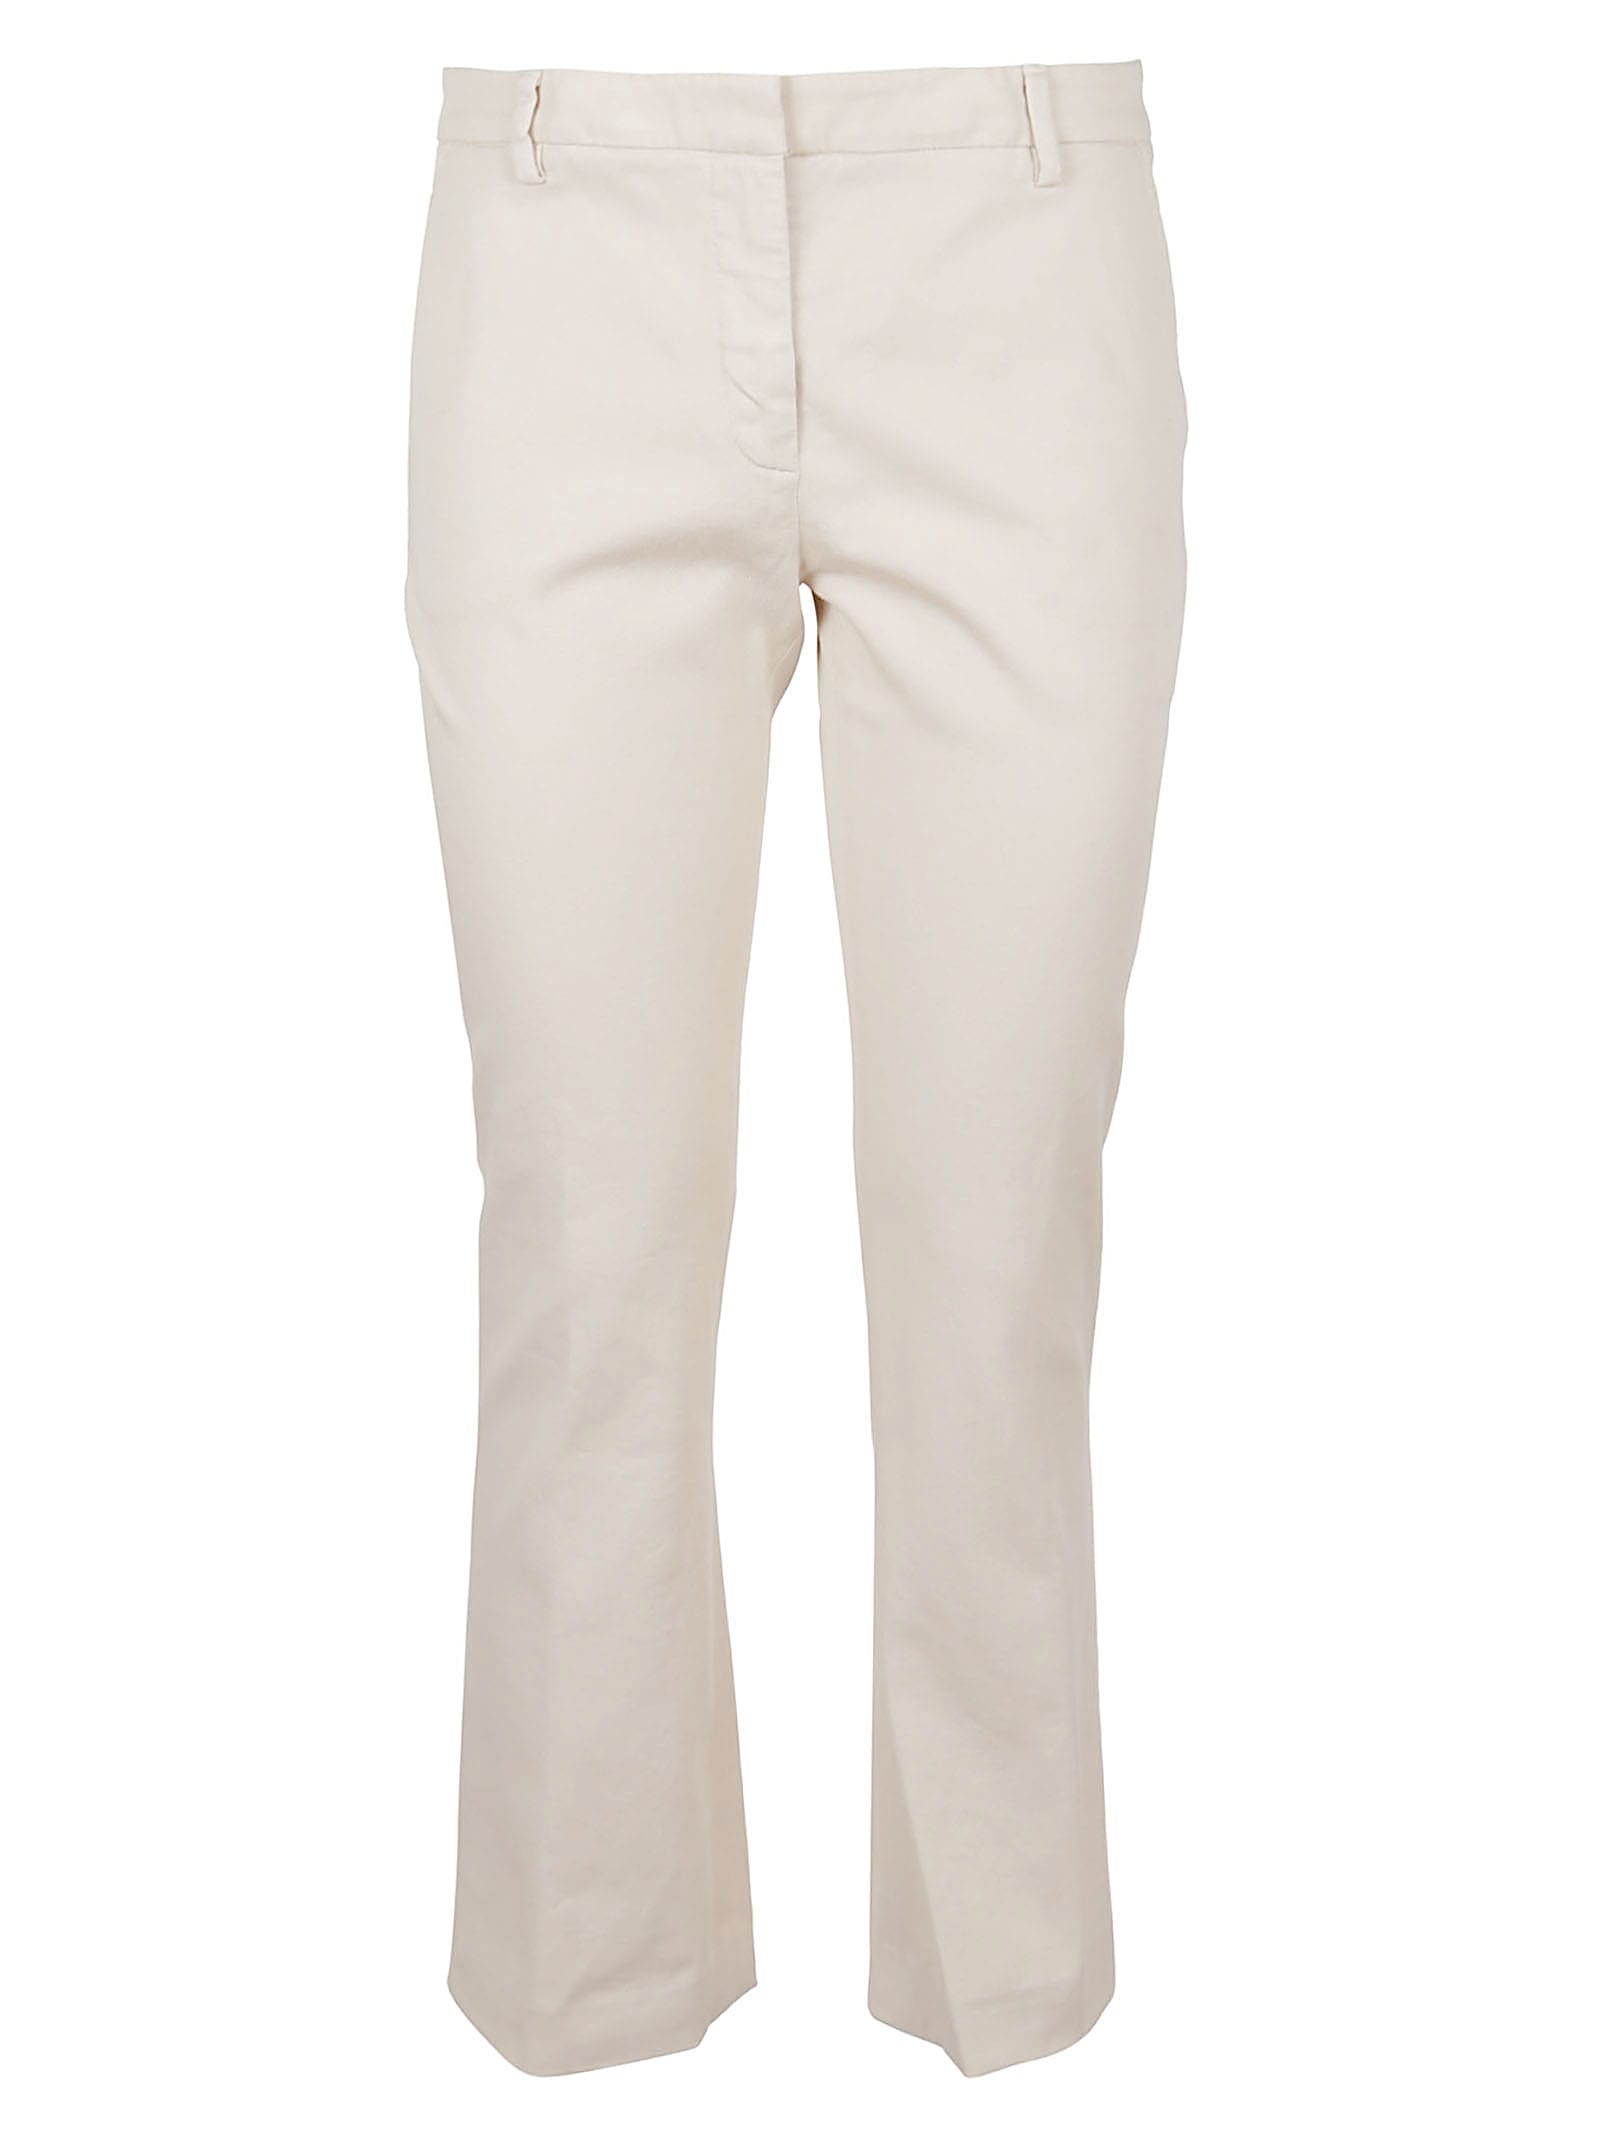 TRUE ROYAL ECO DYED BULL trousers,T152.707 ROSS 009 IVORY